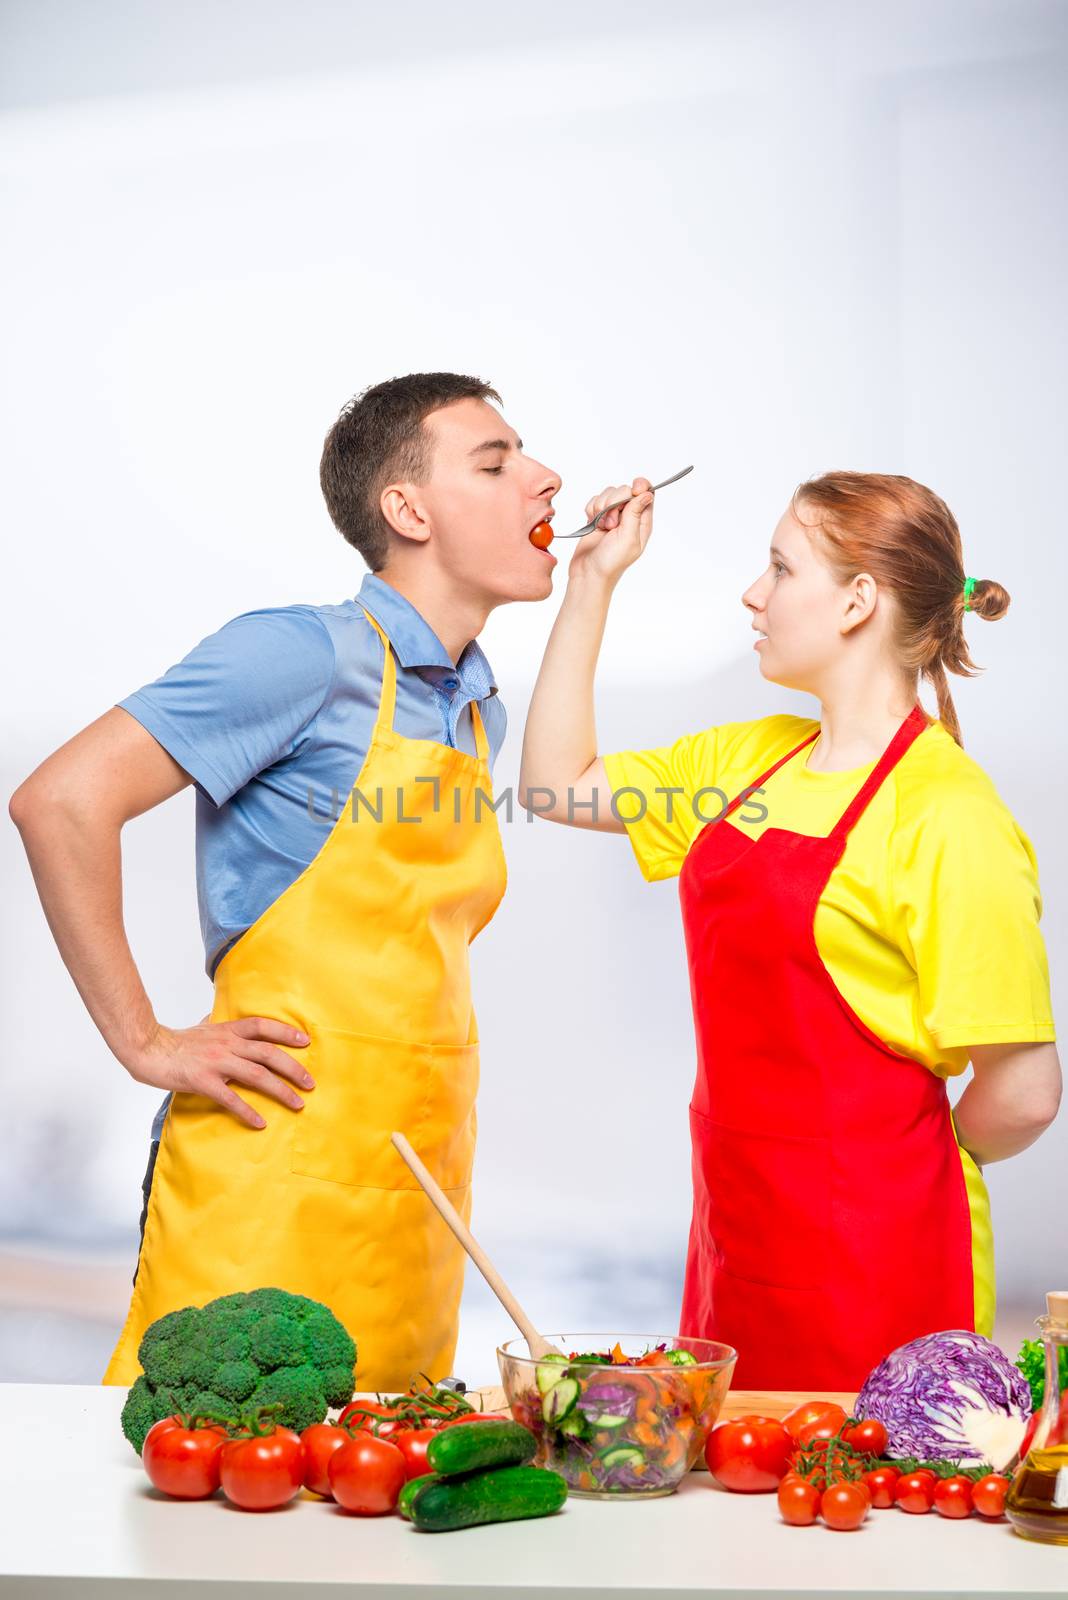 a woman with a wooden spoon feeds a man a healthy vegetable salad in the kitchen